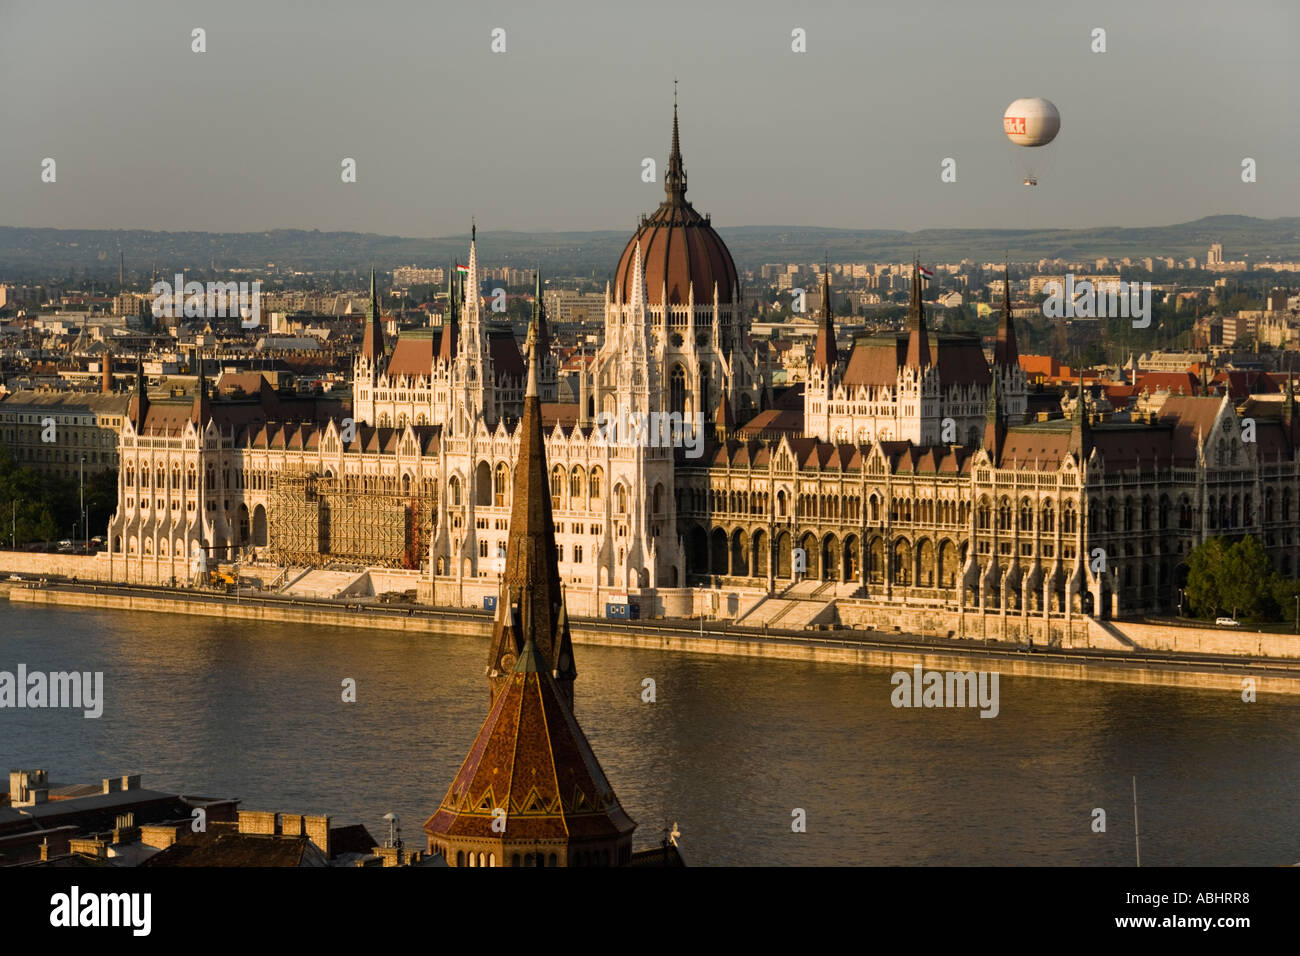 View to the Parliament and Budapest Eye balloon over the Danube river Pest Budapest Hungary Stock Photo